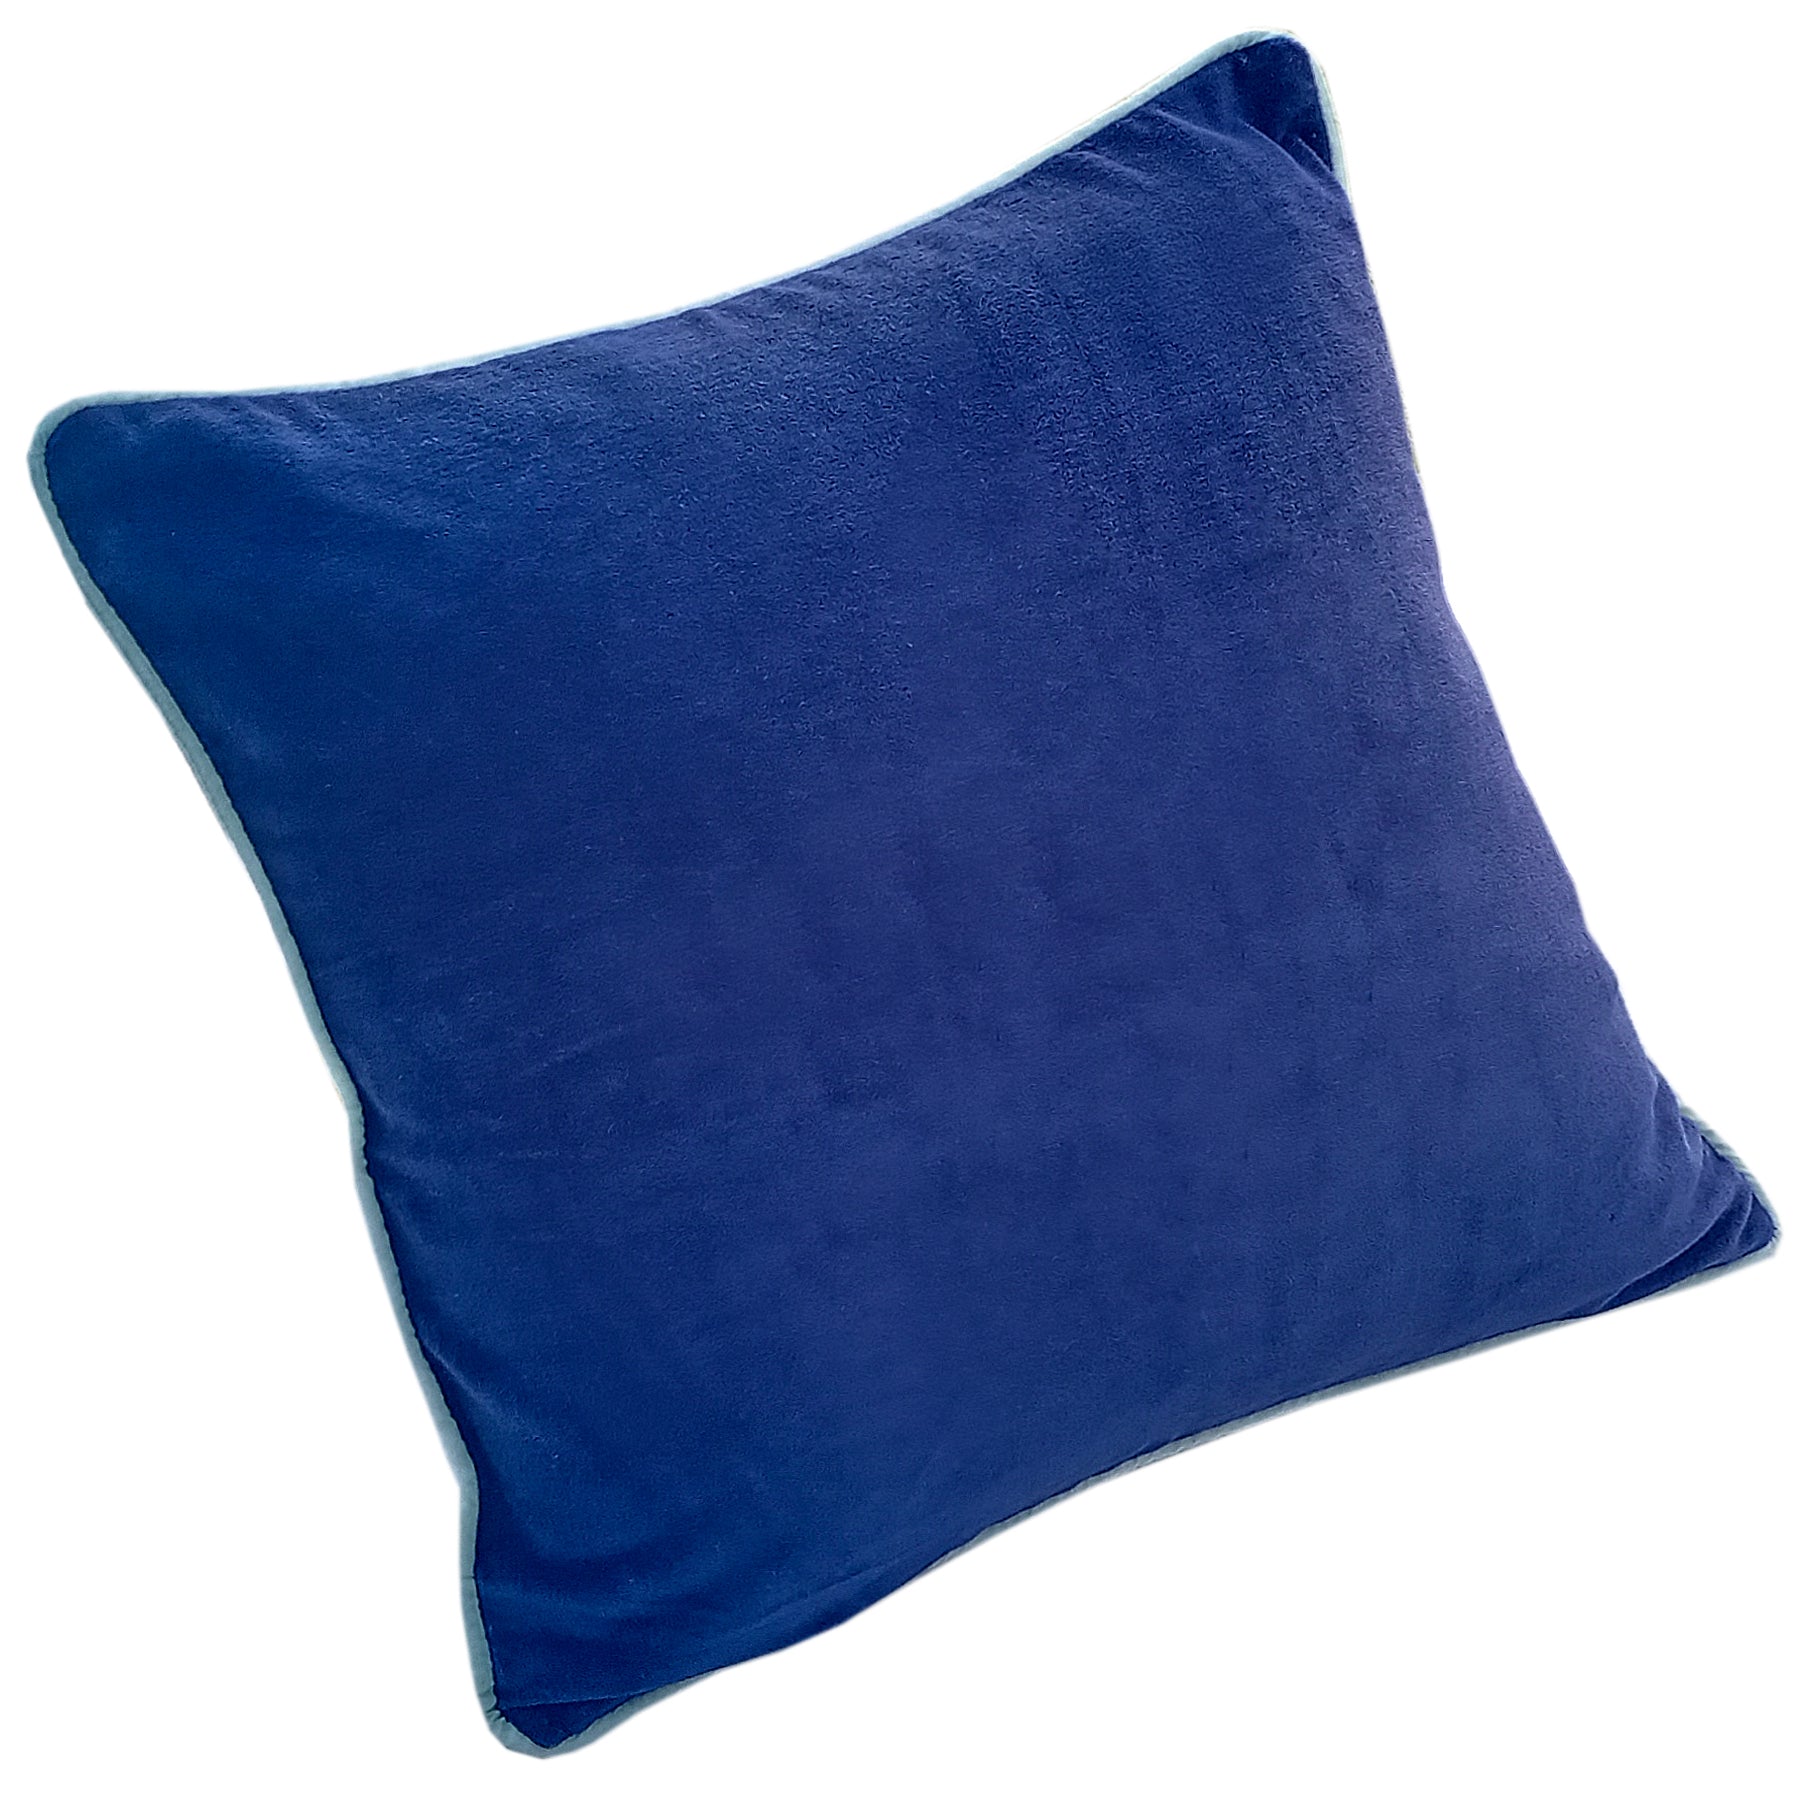 Blue Velvet Cushion Cover with piping - The Teal Thread